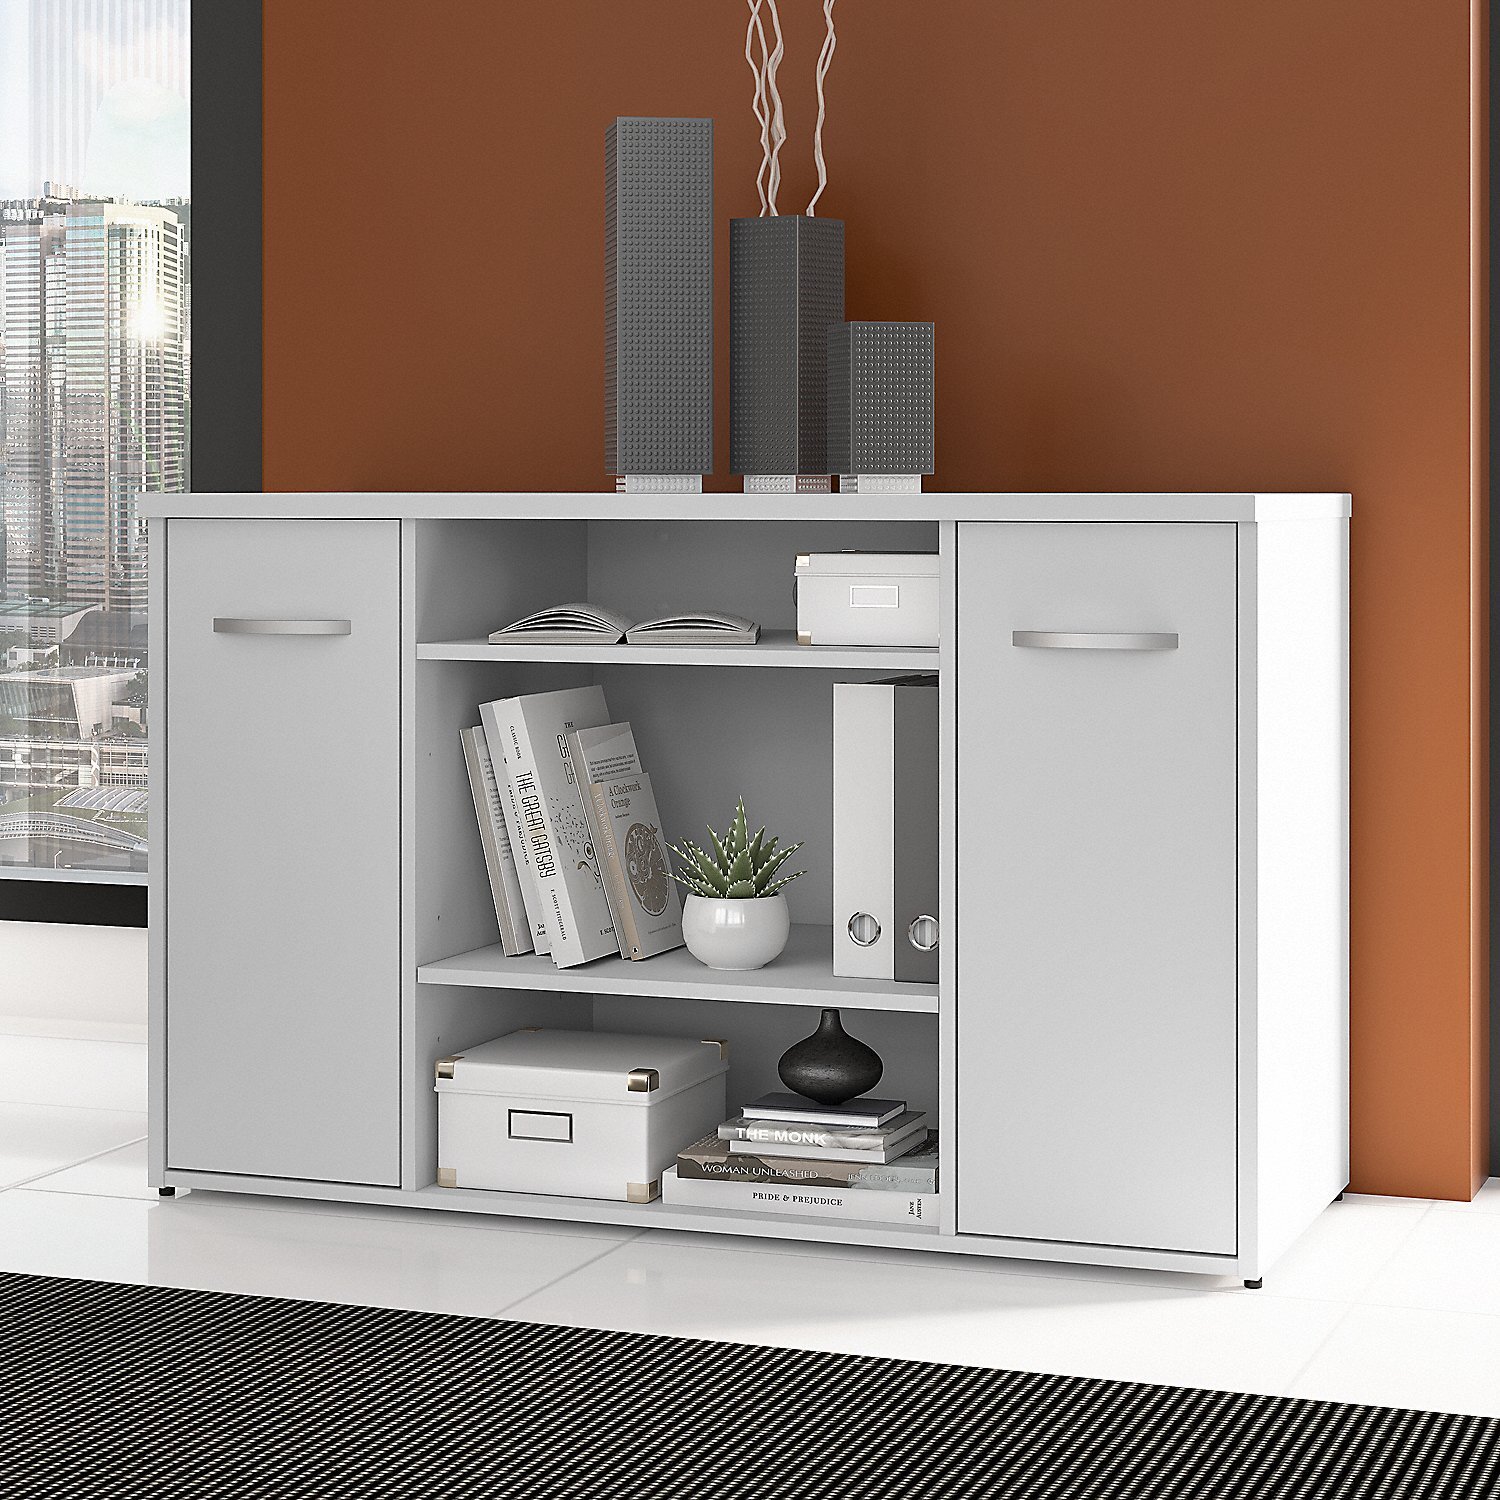 Bush Business Furniture Universal Tall Clothing Storage Cabinet with Doors and Shelves Platinum Gray